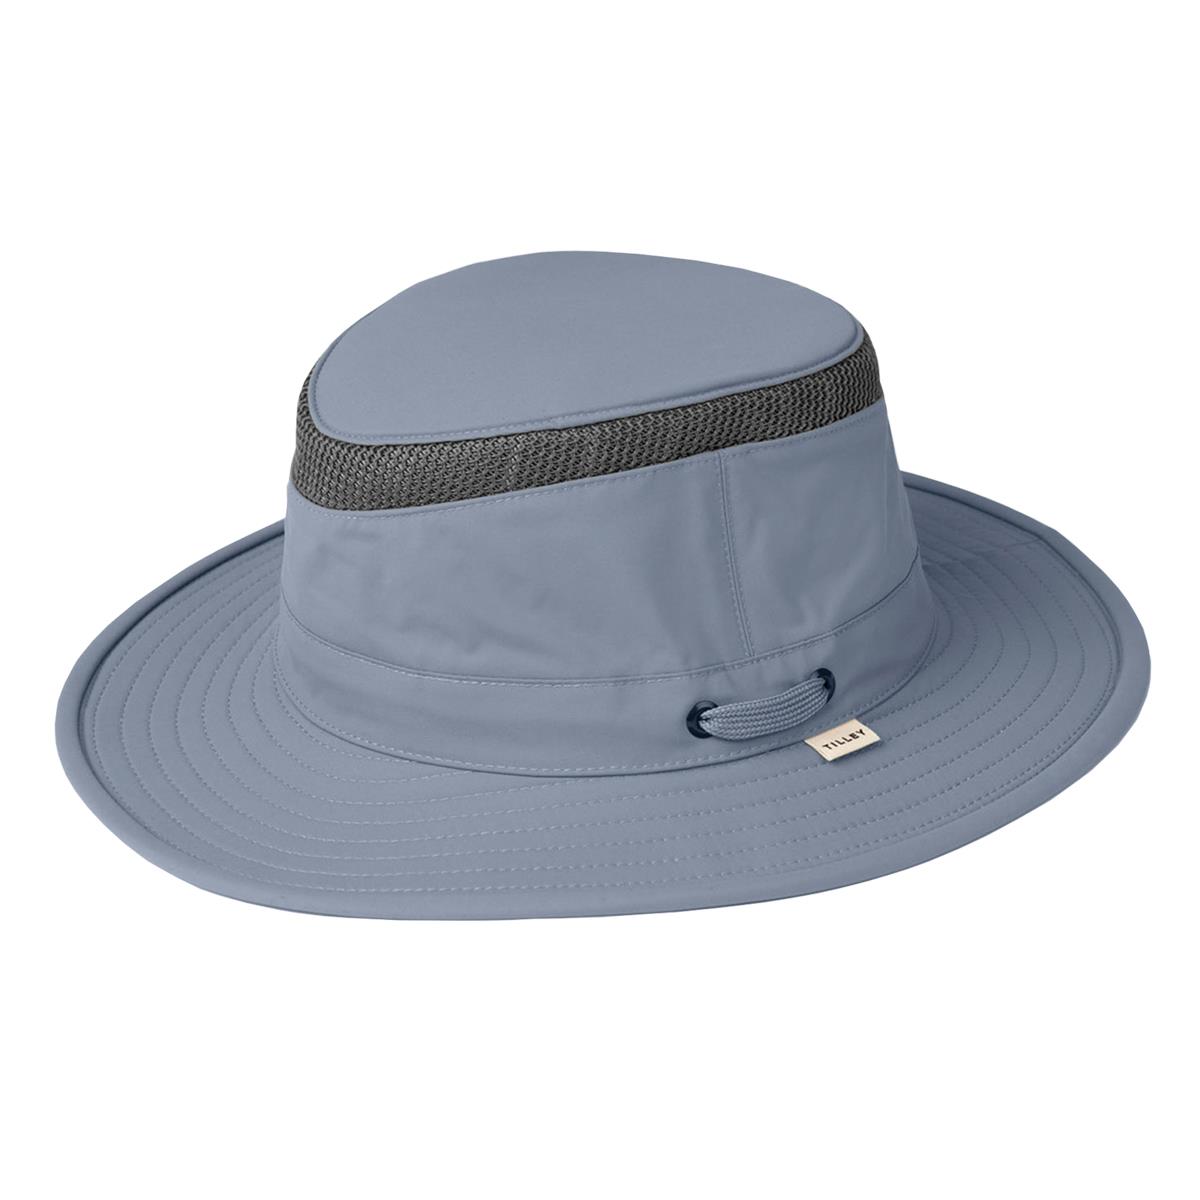 Can the Tilley LTM5 hat be washed in a machine?